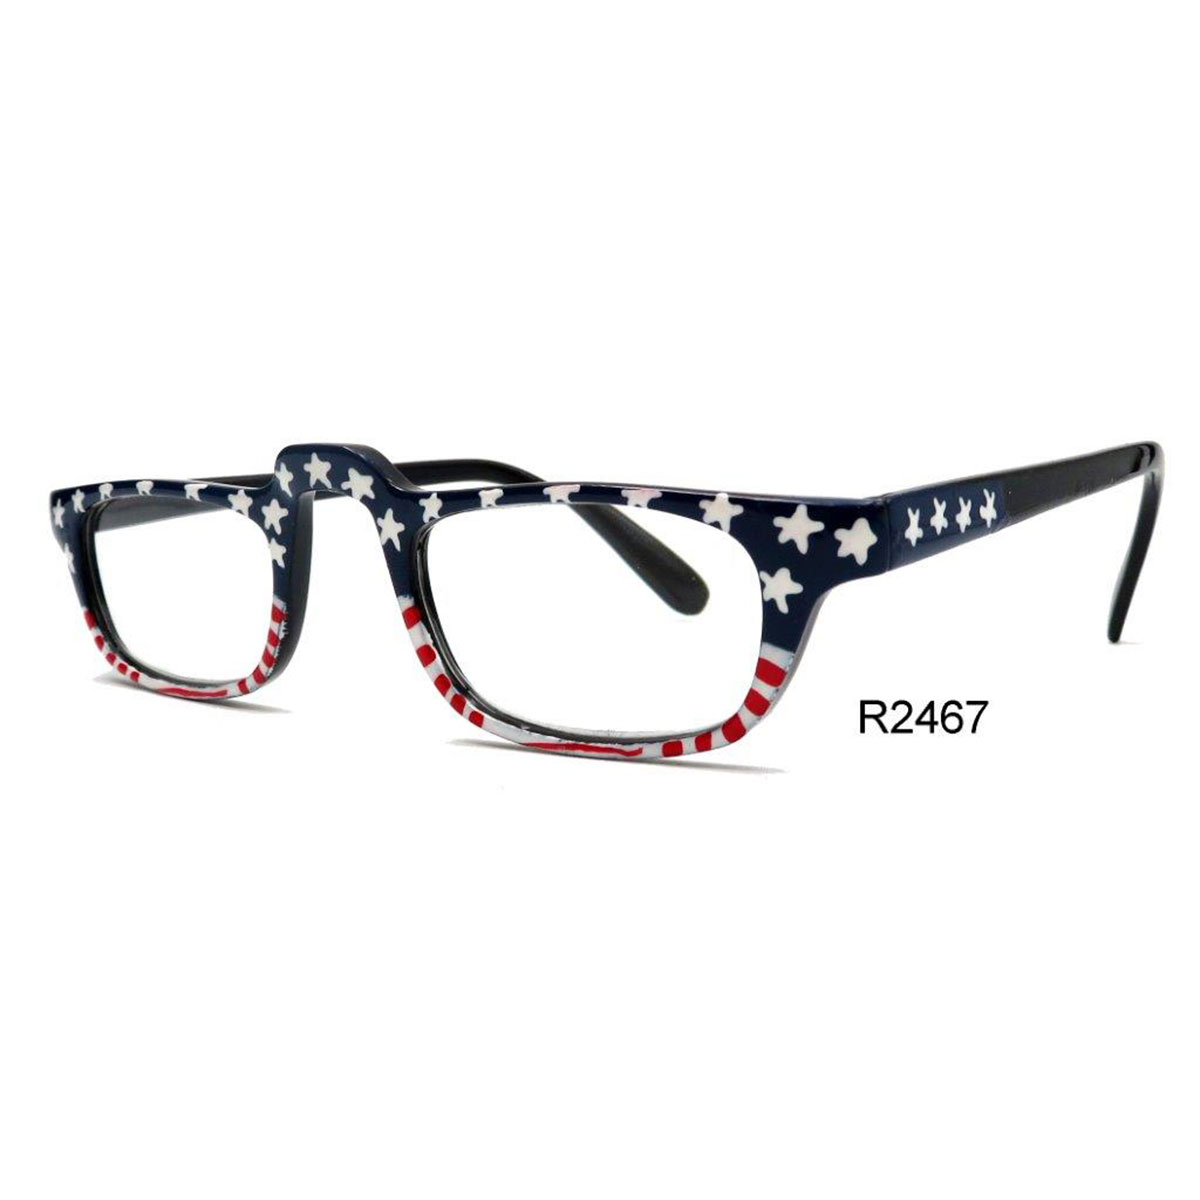 Hand Painted Reading Glasses - #2467 12 Pack